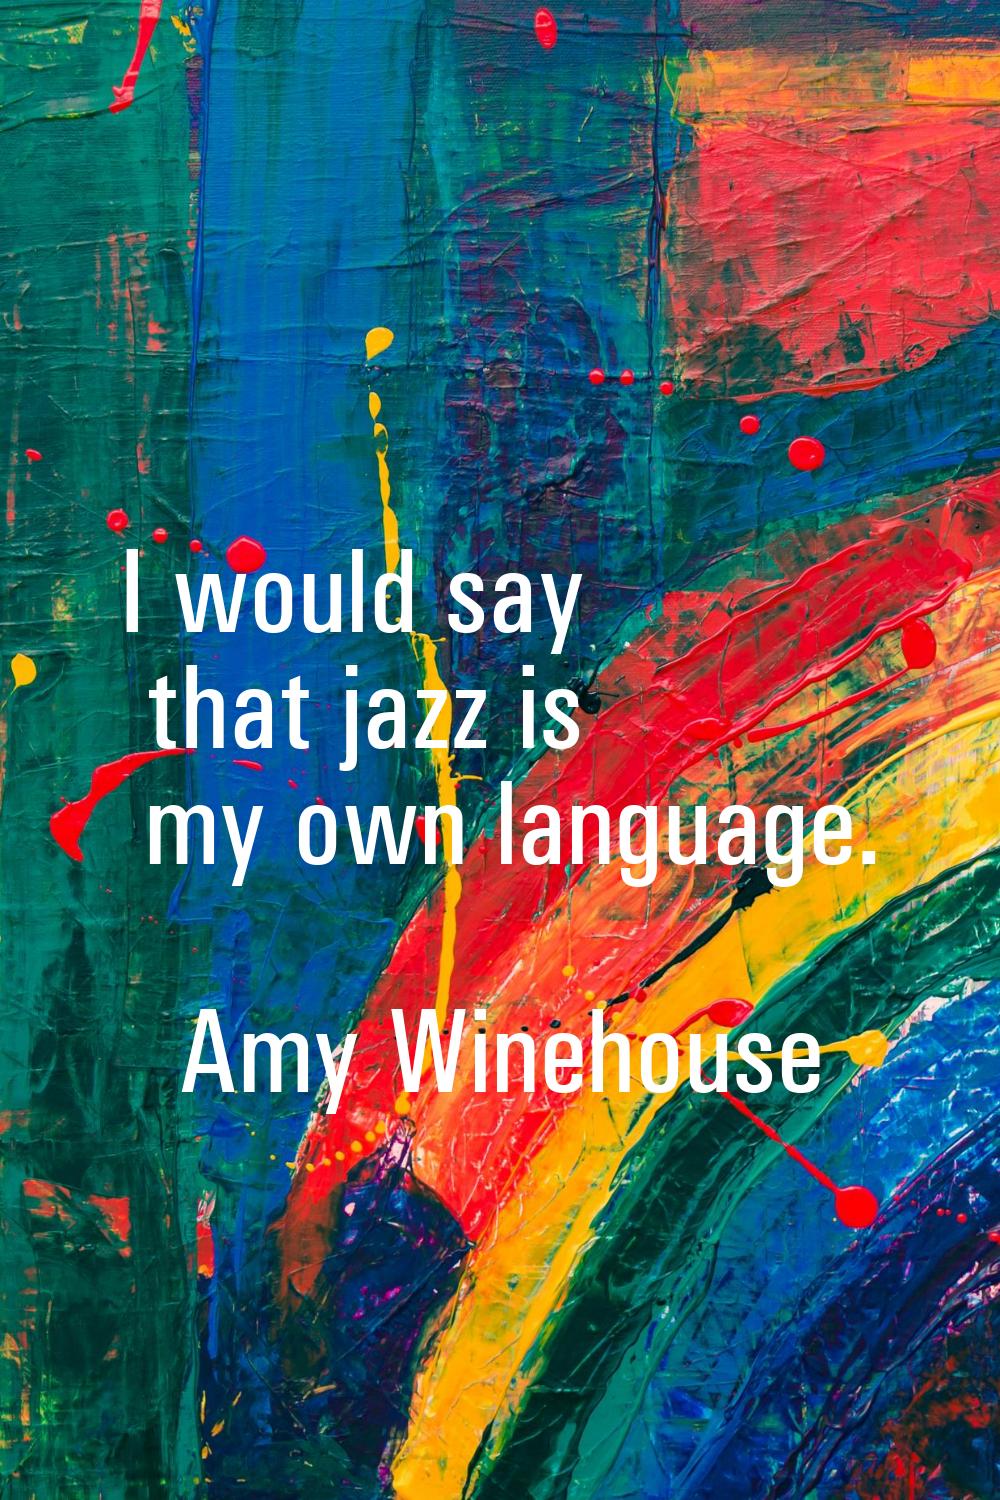 I would say that jazz is my own language.